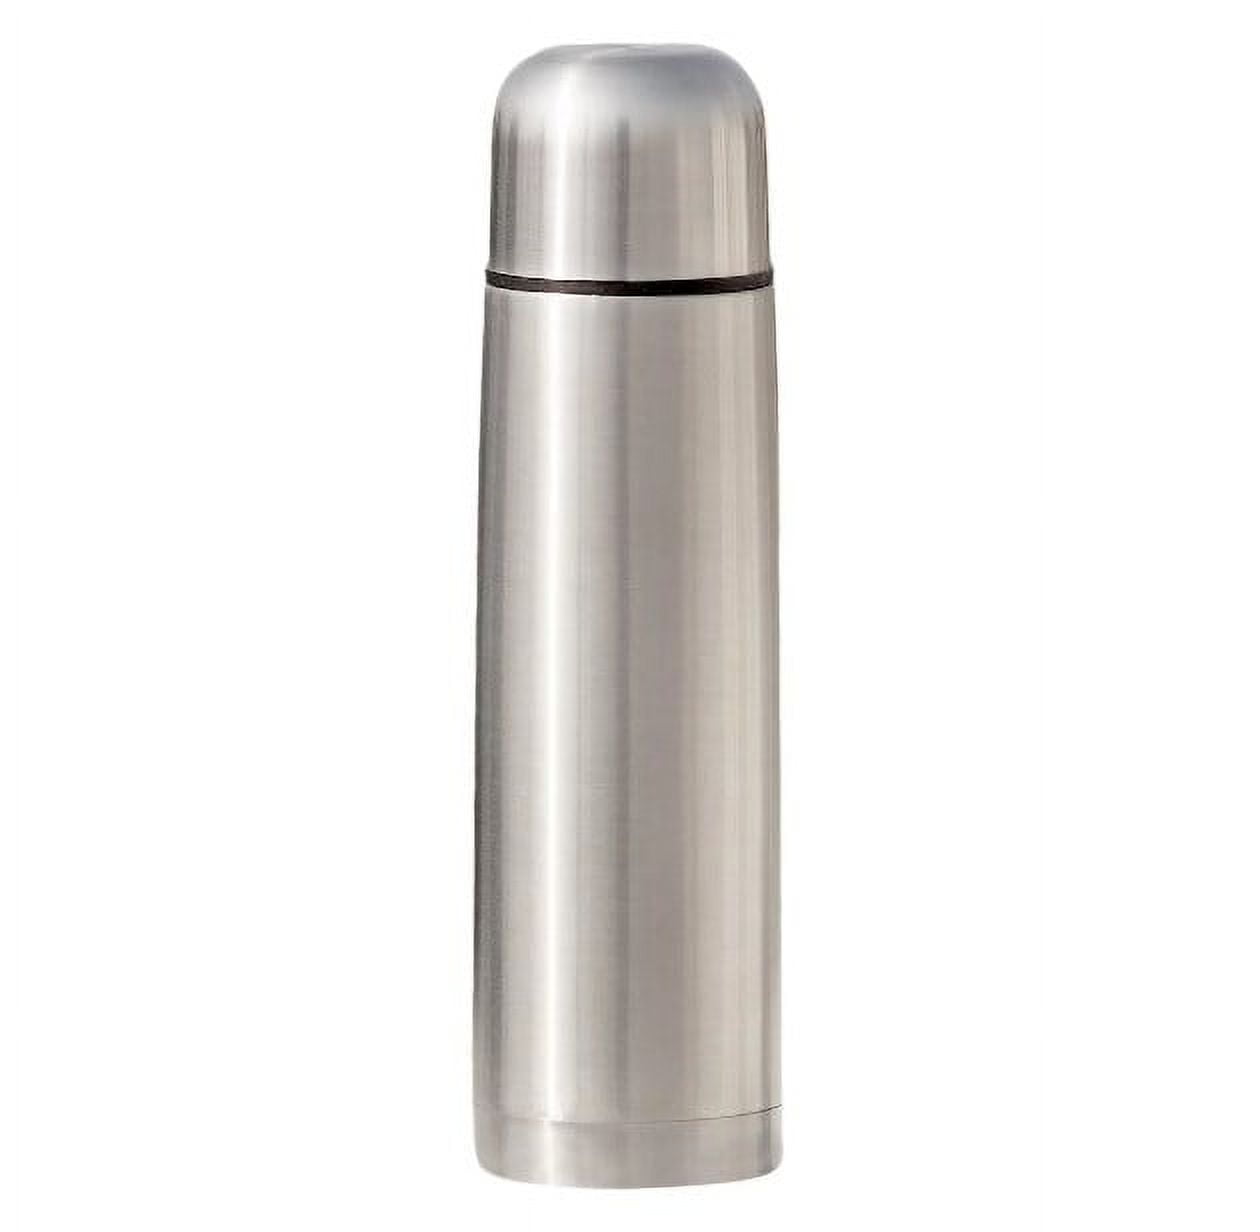 Best Stainless Steel Coffee Thermos - BPA Free - Triple Wall Insulated -  Hot Tea or Cold Water Bottle + Drink Cup Top - NEW Easy C 